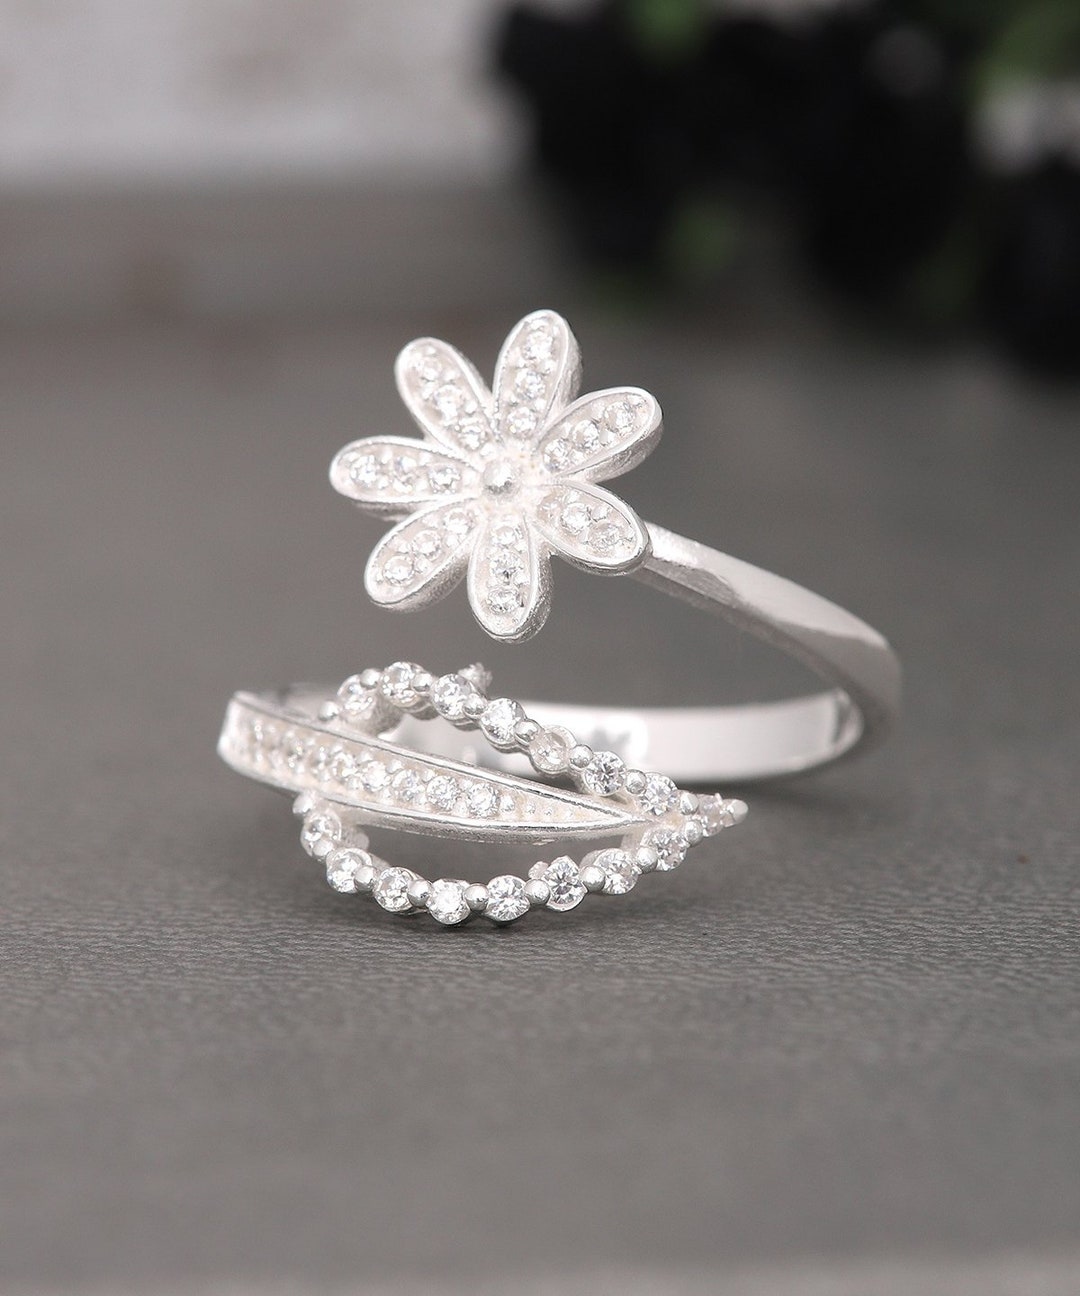 Zircon & 925 Sterling Silver Free Size Adjustable Flower Ring, Dainty Ring, Silver  Ring, Unique Gift Ring - Etsy